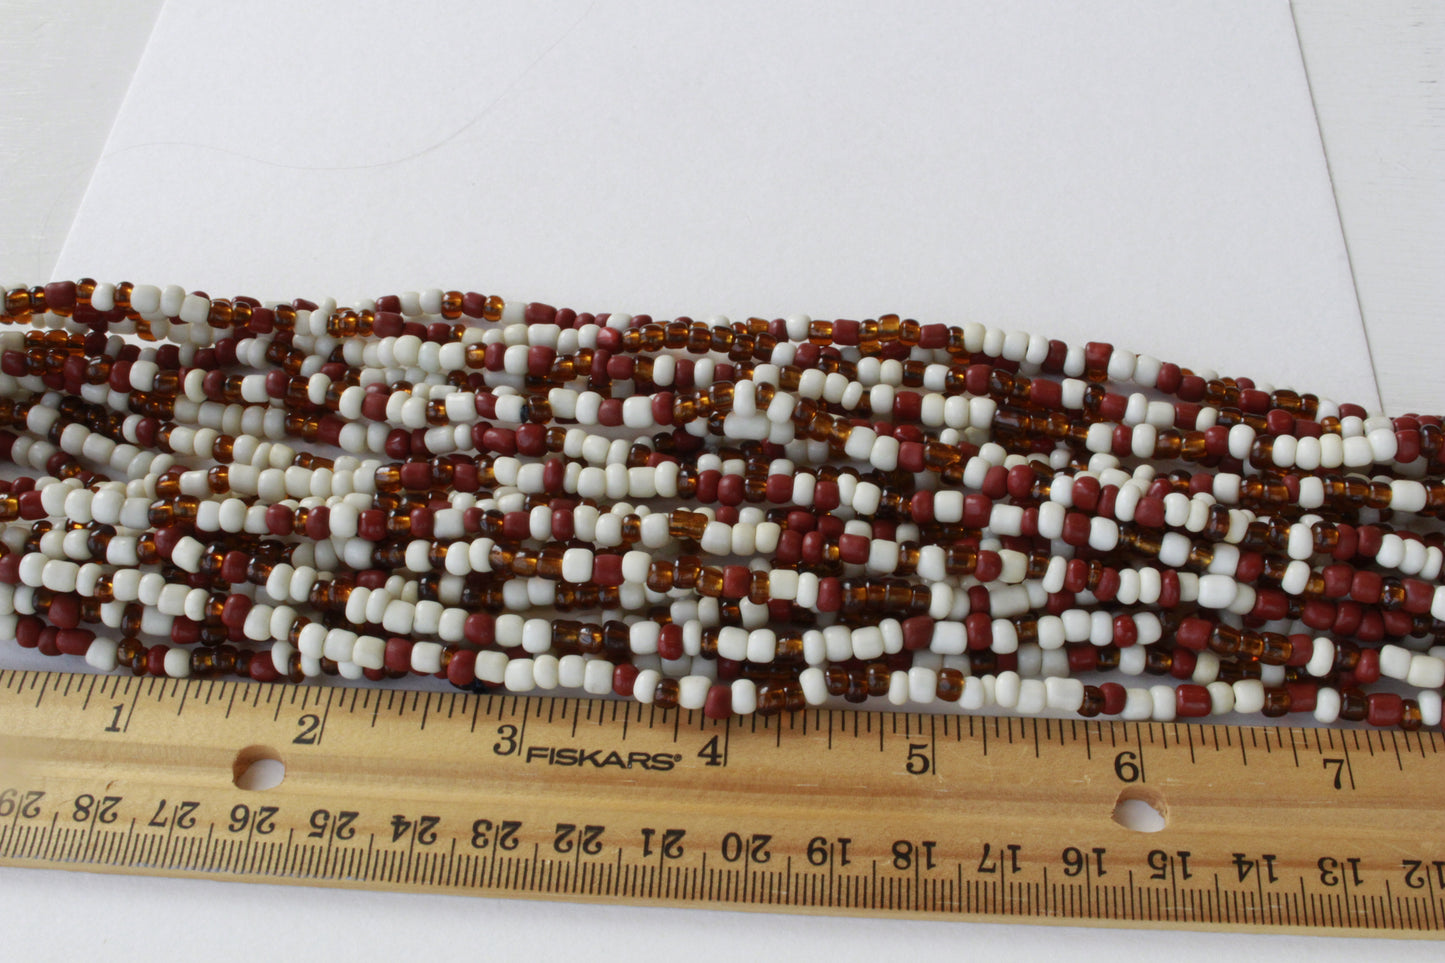 Rustic Indonesian Seed Beads - Bright Colorful Mix - 42 inches